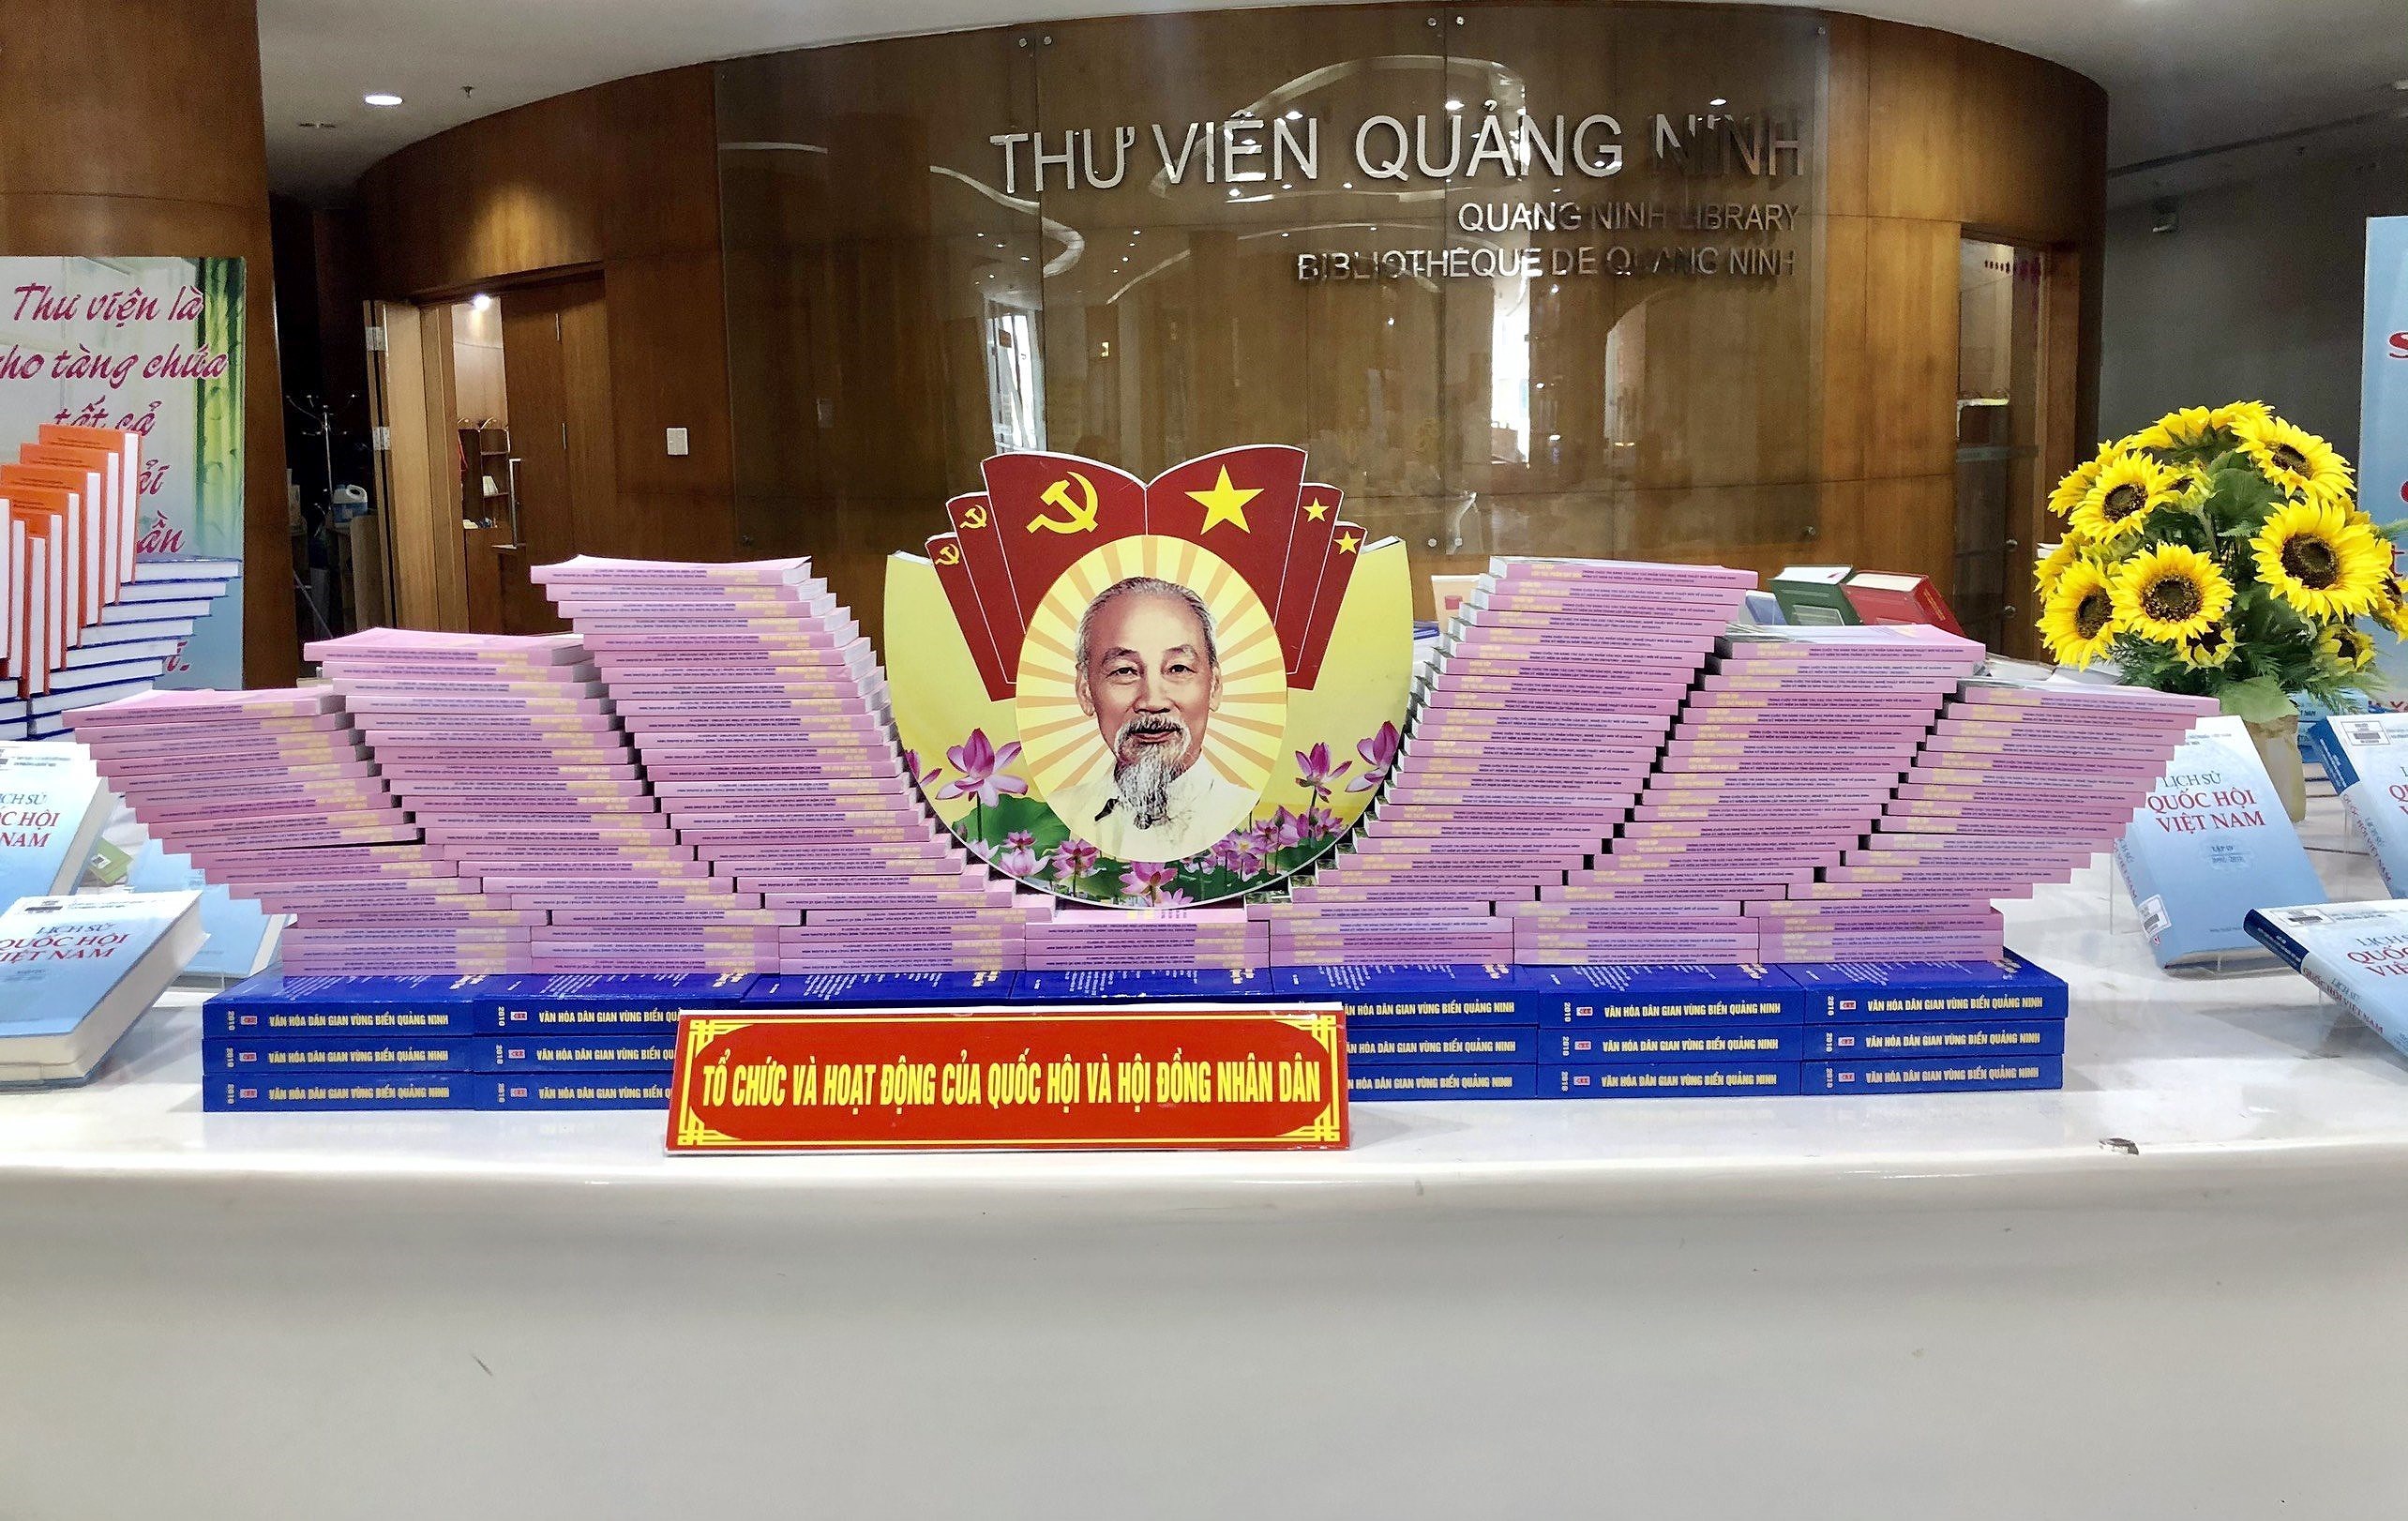 Books on election on display in Quang Ninh province hinh anh 1